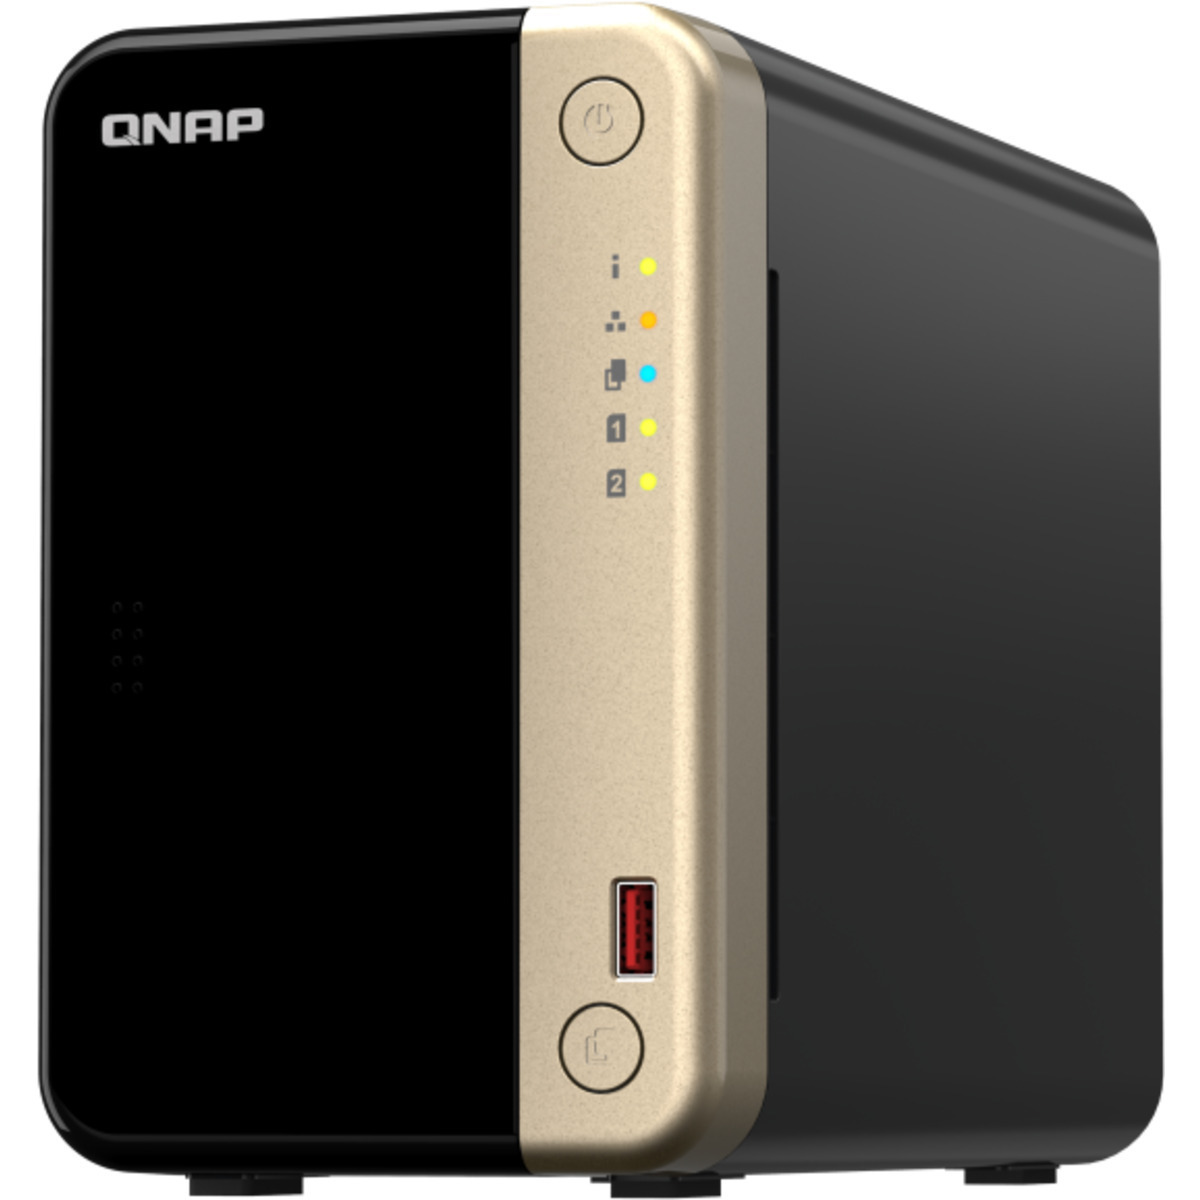 QNAP TS-264 20tb 2-Bay Desktop Multimedia / Power User / Business NAS - Network Attached Storage Device 2x10tb Seagate IronWolf Pro ST10000NT001 3.5 7200rpm SATA 6Gb/s HDD NAS Class Drives Installed - Burn-In Tested - ON SALE TS-264